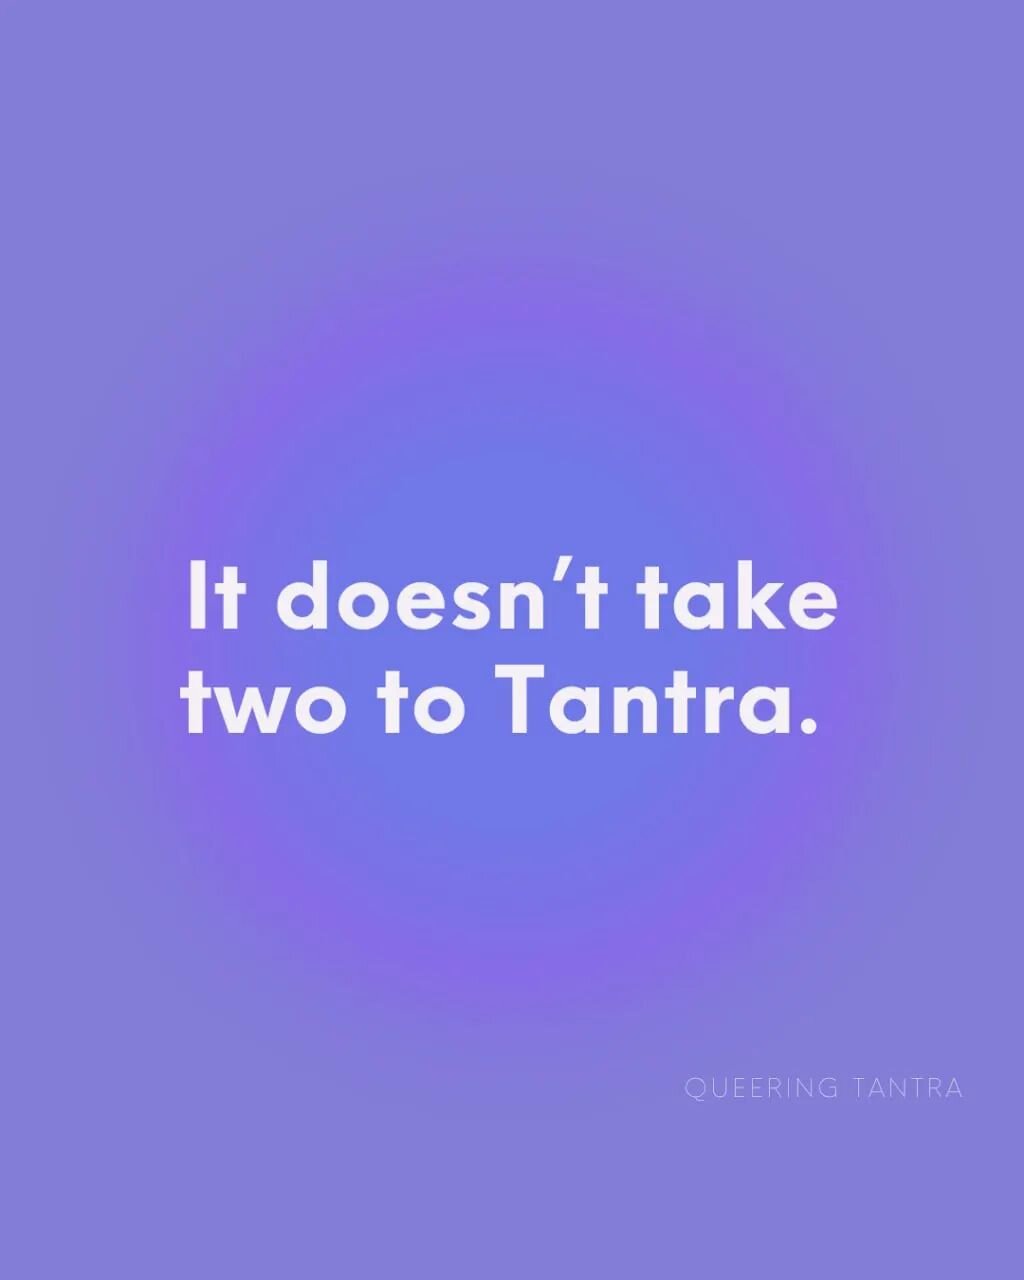 The idea of Tantra being a practice for couples, or a tool towards finding a partner seems quite flawed. Appropriated by cis-het-monogamy-capitalism, it was likely repackaged from its spiritual origin, promoting a status quo rather than being used as